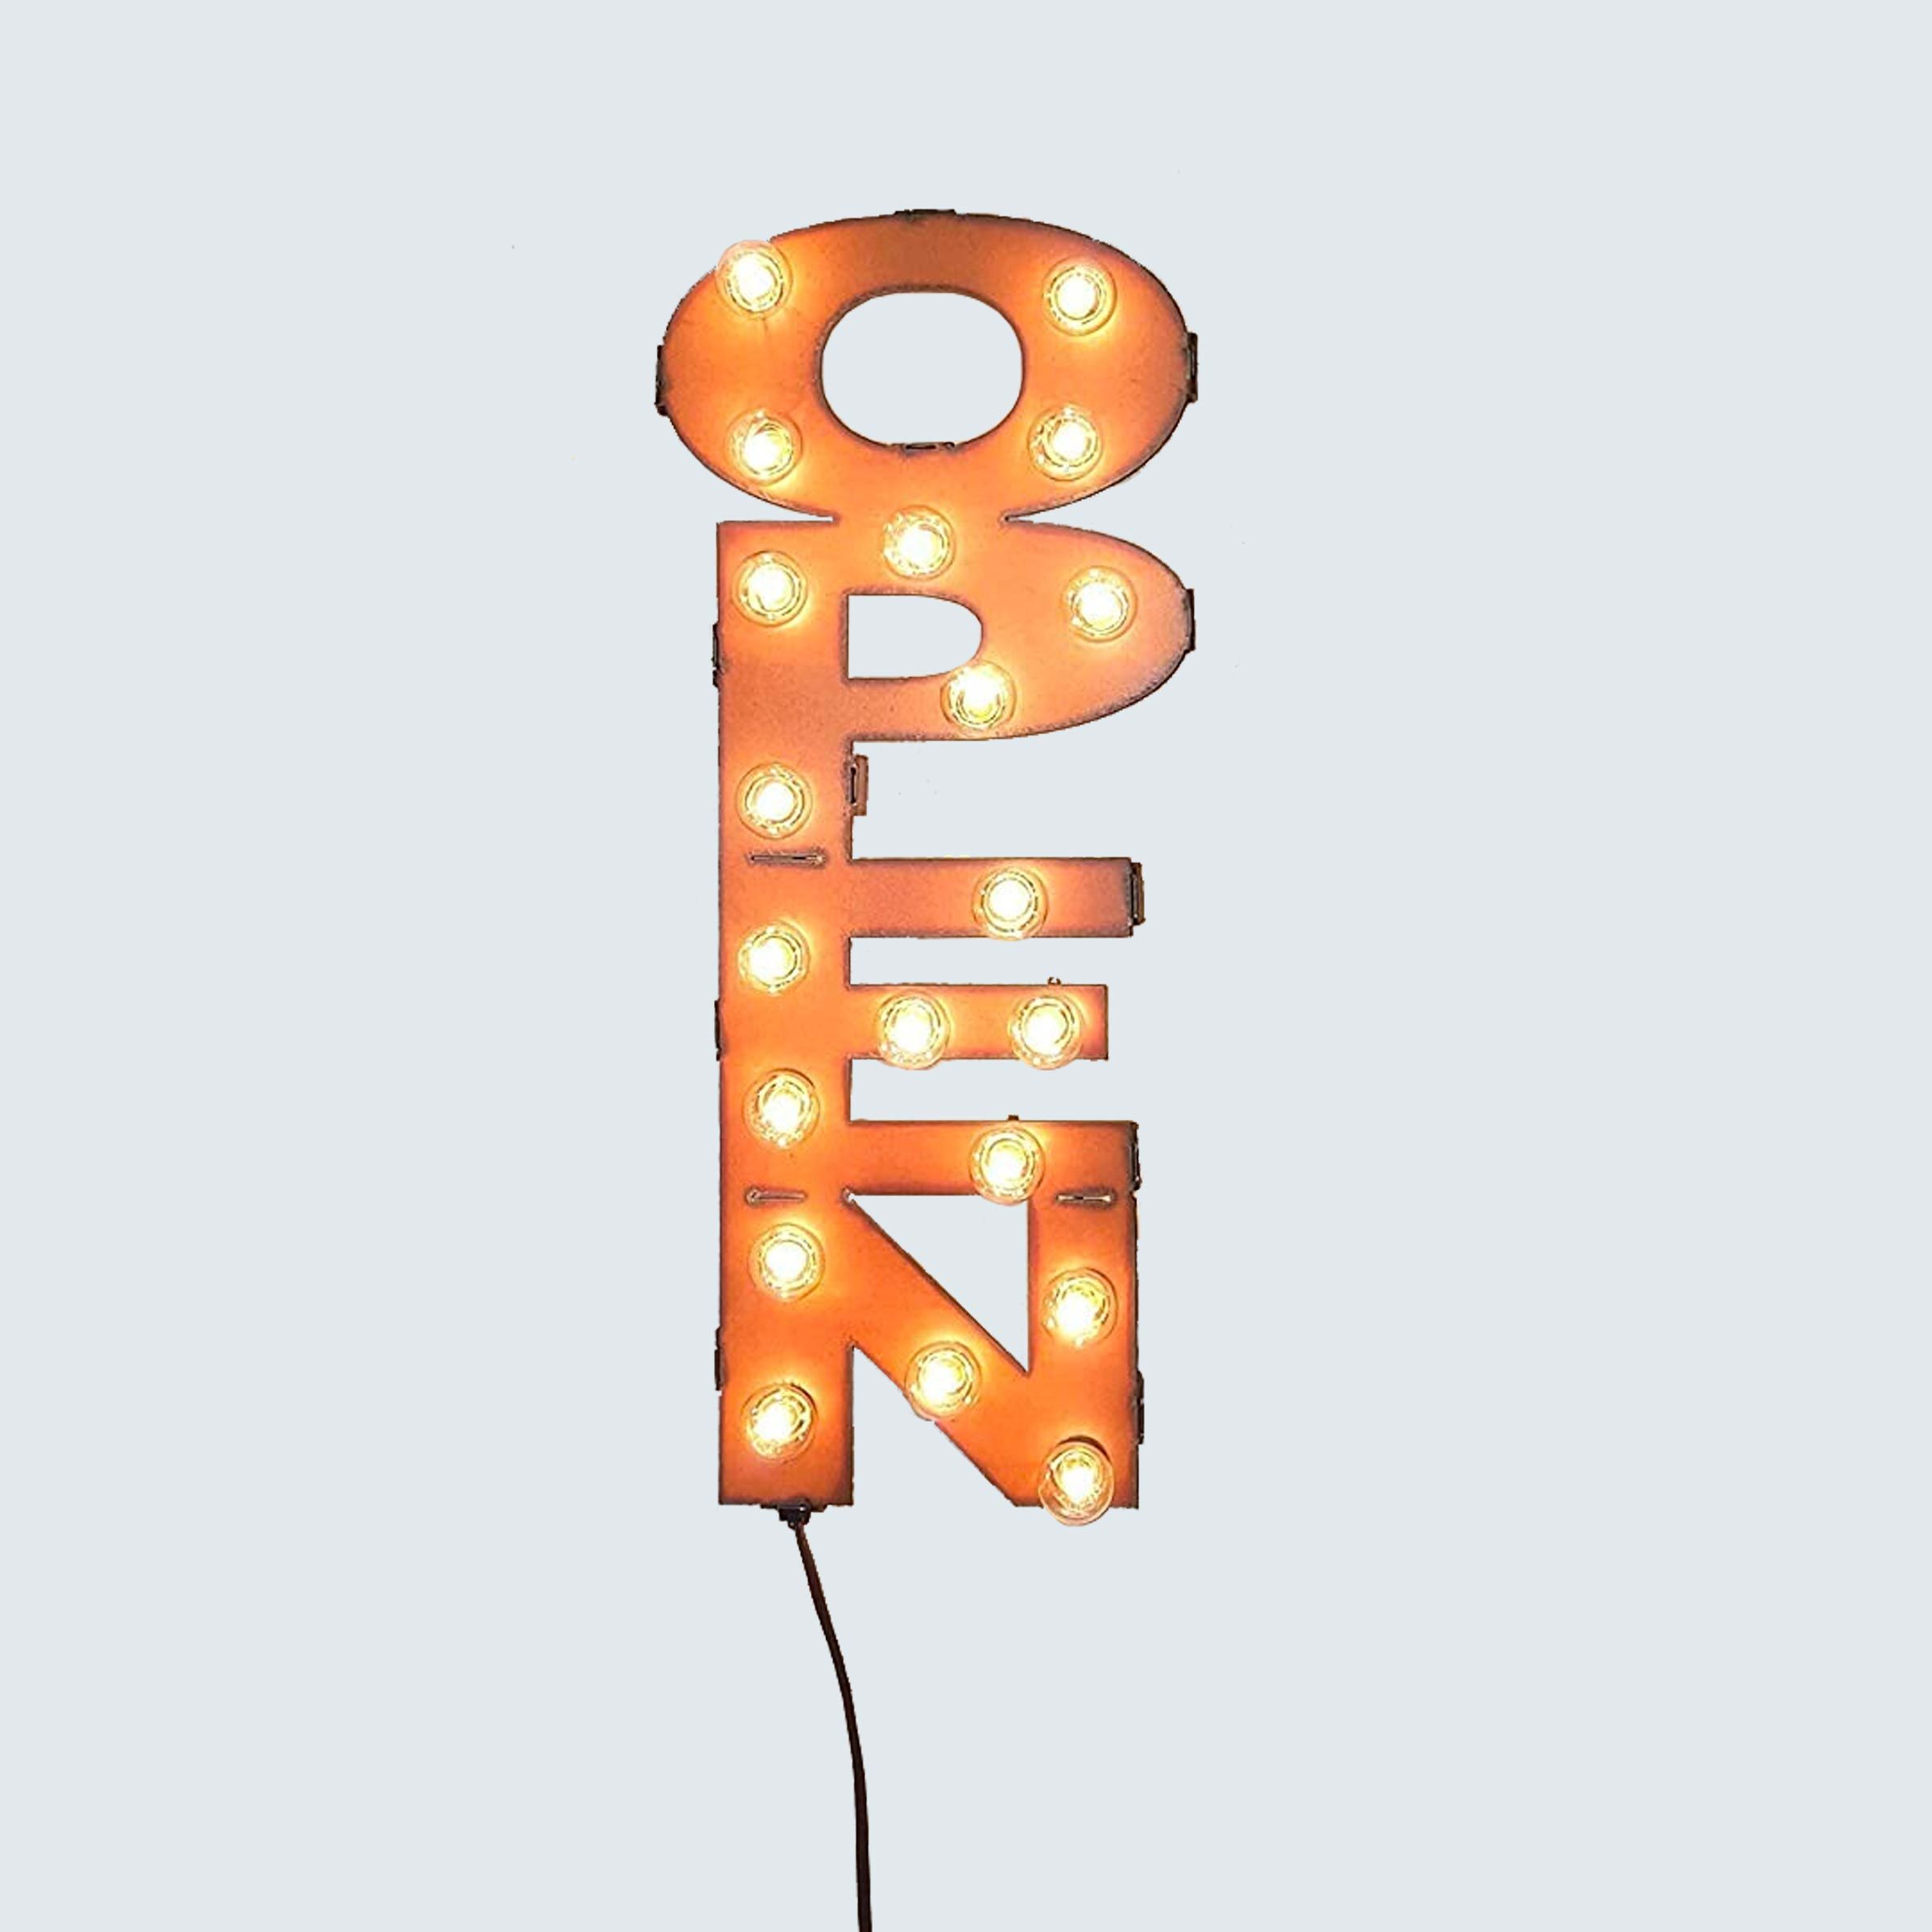 Vintage-inspired "OPEN" neon sign